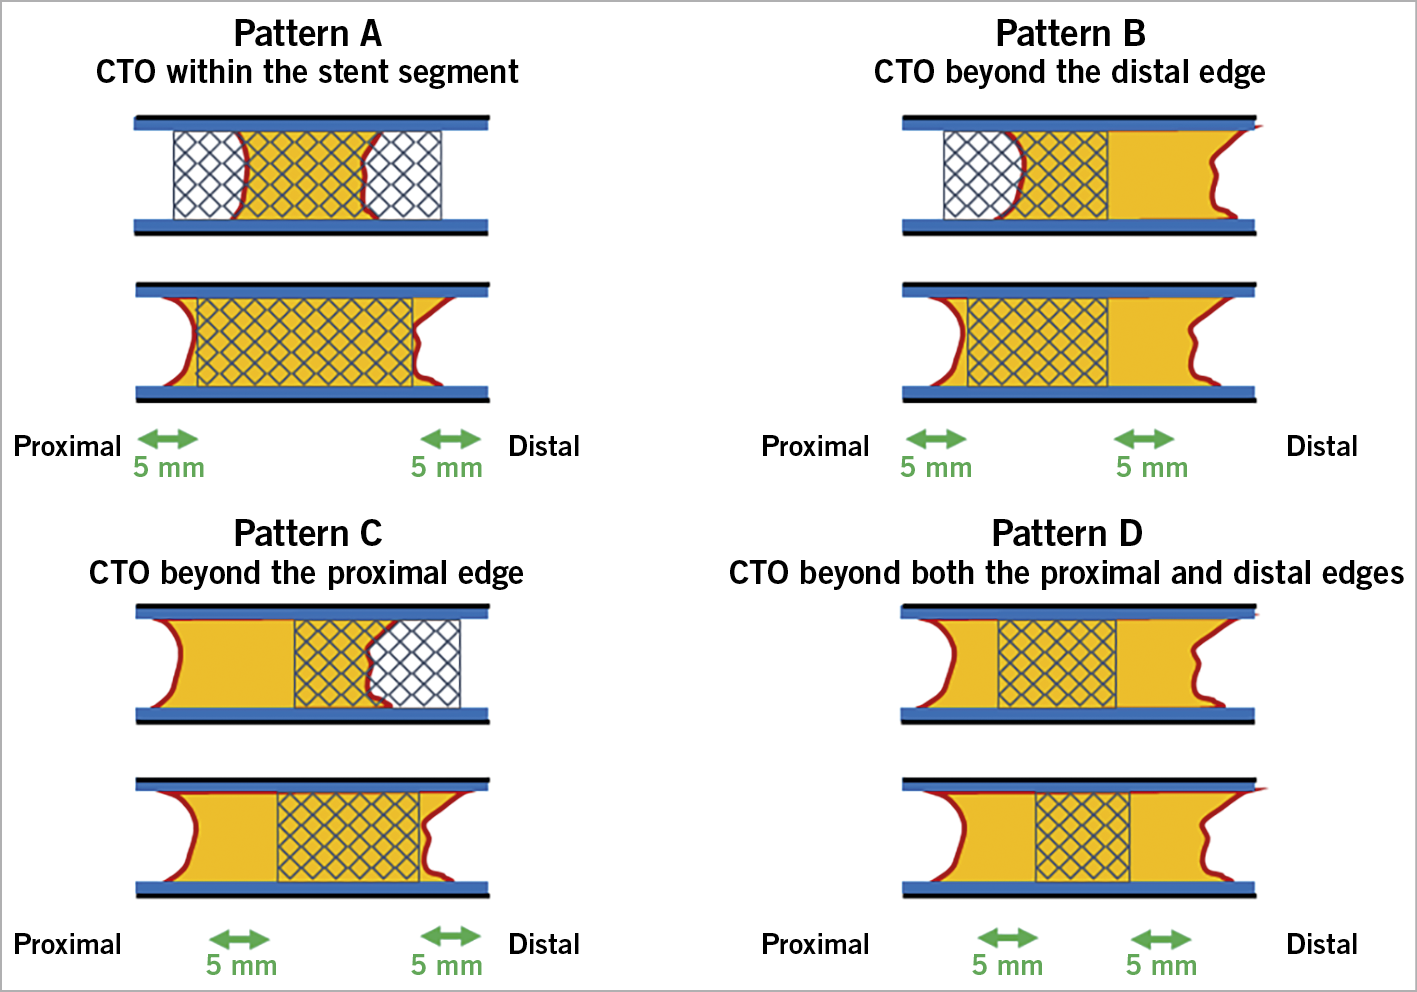 Central illustration. Occlusion patterns of in-stent chronic total occlusions. According to the occlusion patterns, in-stent CTOs were divided into the following groups. A) CTO within the stent segment. B) CTO beyond the distal edge. C) CTO beyond the proximal edge. D) CTO beyond both the proximal and distal edges. An edge was defined as an area 5 mm from the stent edge. The stent segment included the in-stent region as well as the proximal and distal edges.  An edge was defined as an area 5 mm from the stent edge. The stent segment included the in-stent region, as well as the proximal and distal edges. The selection of the CTO-PCI strategy was at the operator’s discretion. In each occlusion pattern, the procedural strategies were classified into an antegrade approach alone, rescue bidirectional approach, and primary bidirectional approach. The procedural strategy, guidewire success, technical success, procedural success, procedural time, contrast volume, fluoroscopic time, in-hospital major adverse cardiac and cerebrovascular events (MACCE), and other complications were compared among the four occlusion patterns. The guidewire crossing time was also compared to the guidewire success.